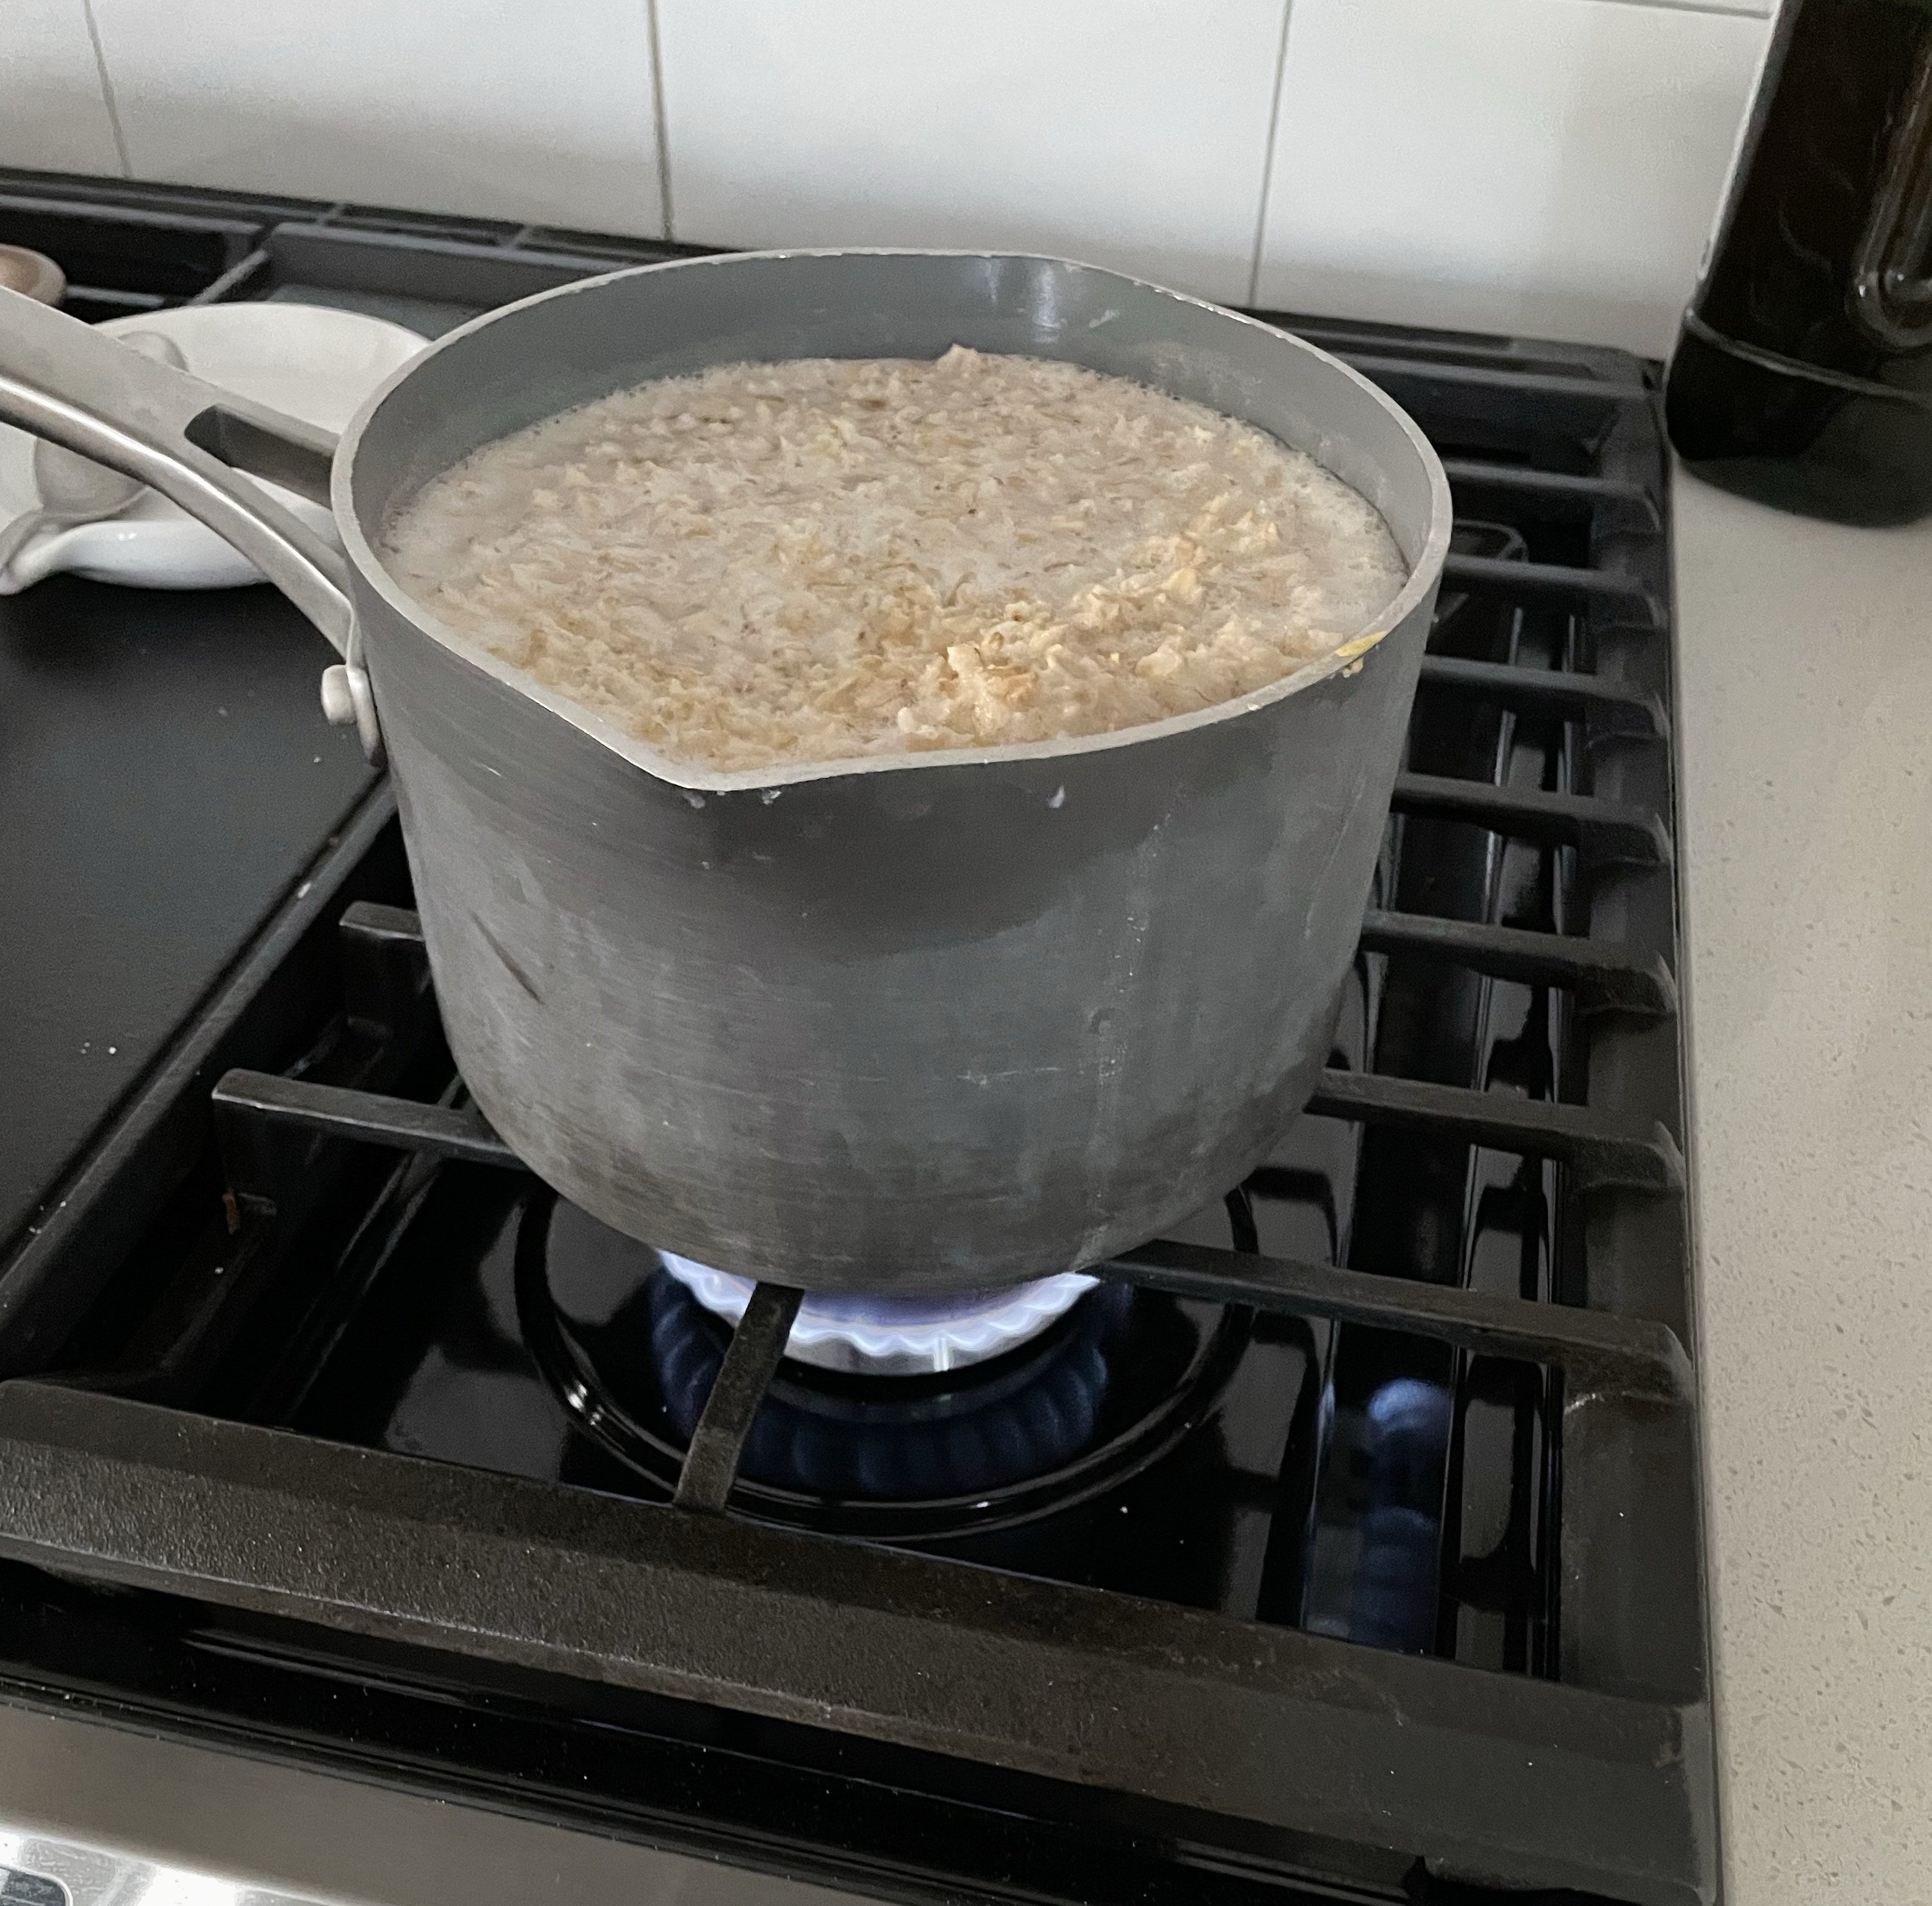 oatmeal cooking on the stove